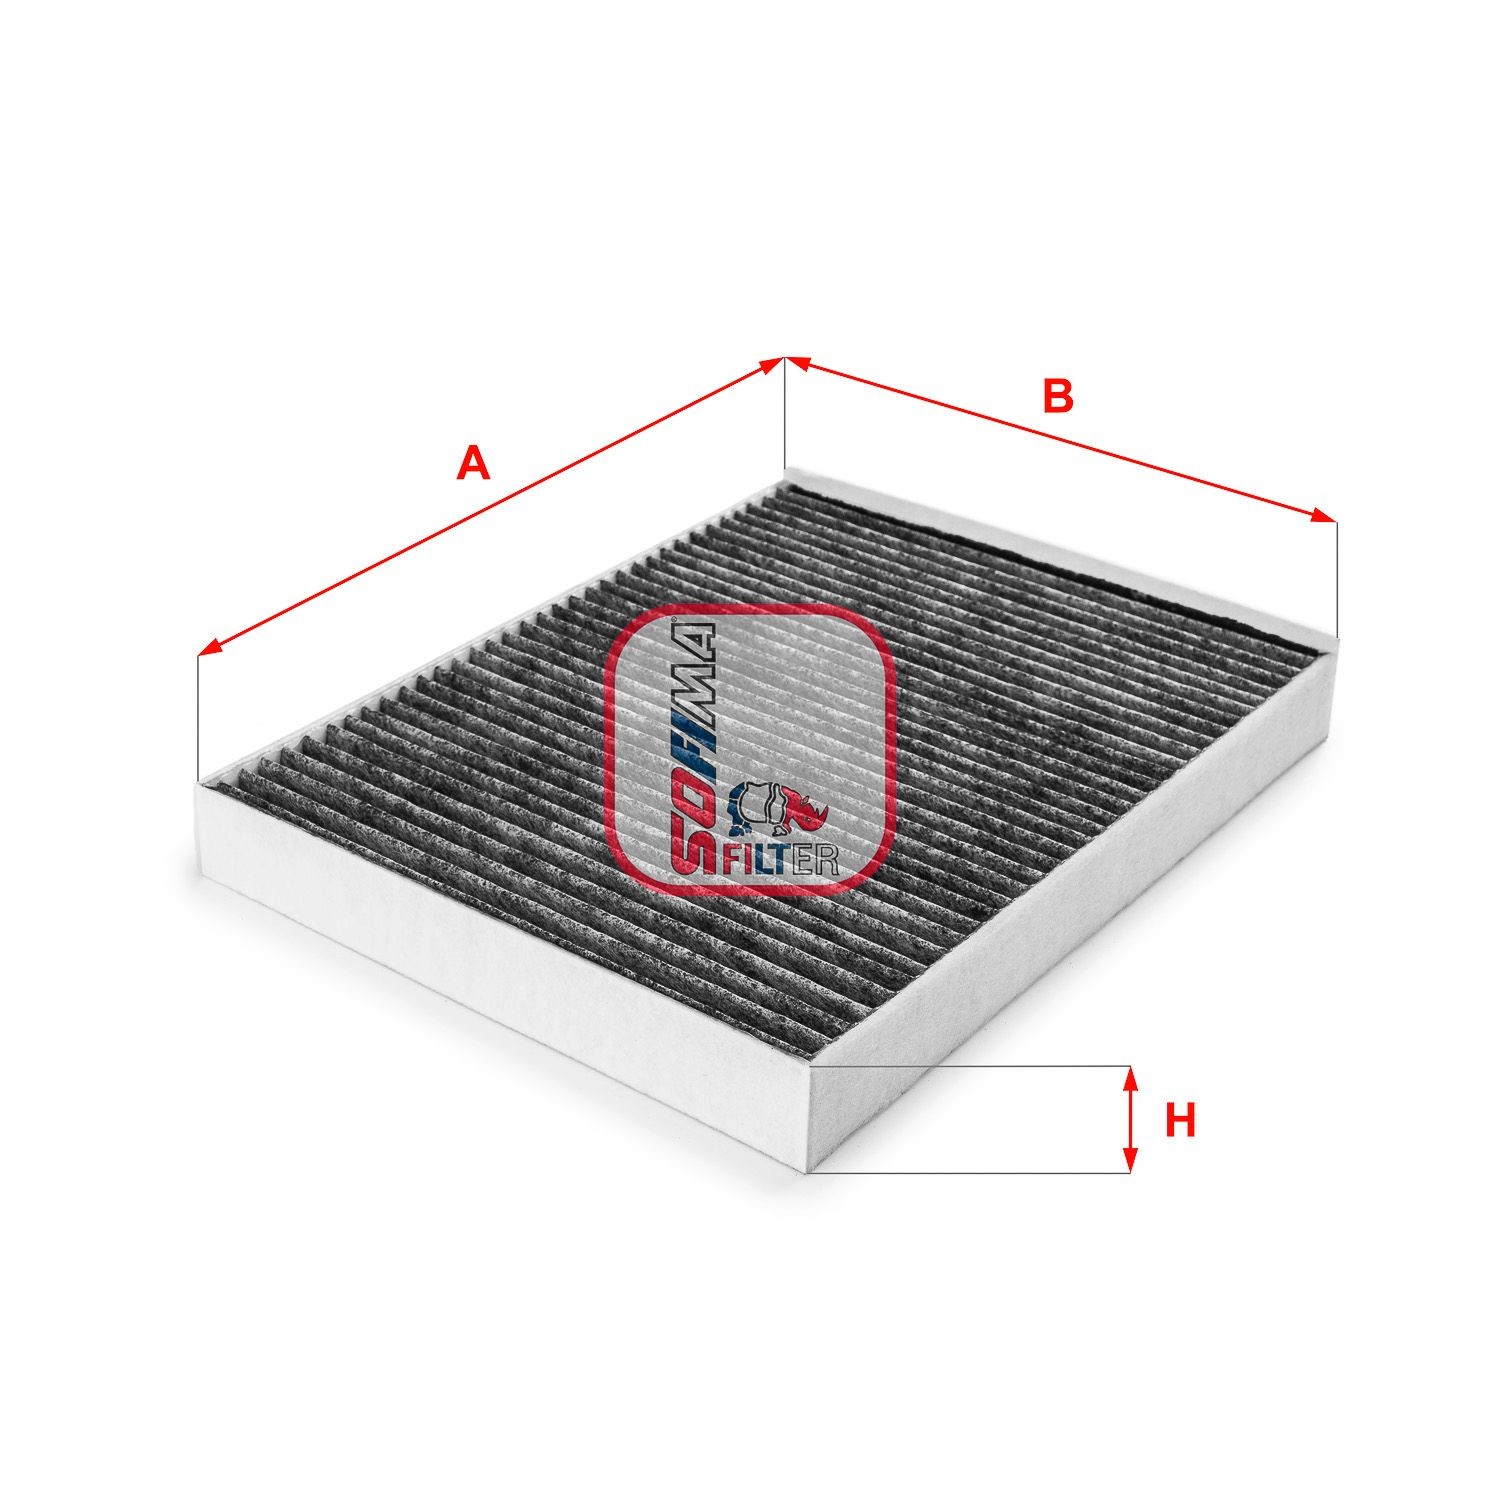 SOFIMA Activated Carbon Filter, 275 mm x 218 mm x 36 mm Width: 218mm, Height: 36mm, Length: 275mm Cabin filter S 4148 CA buy